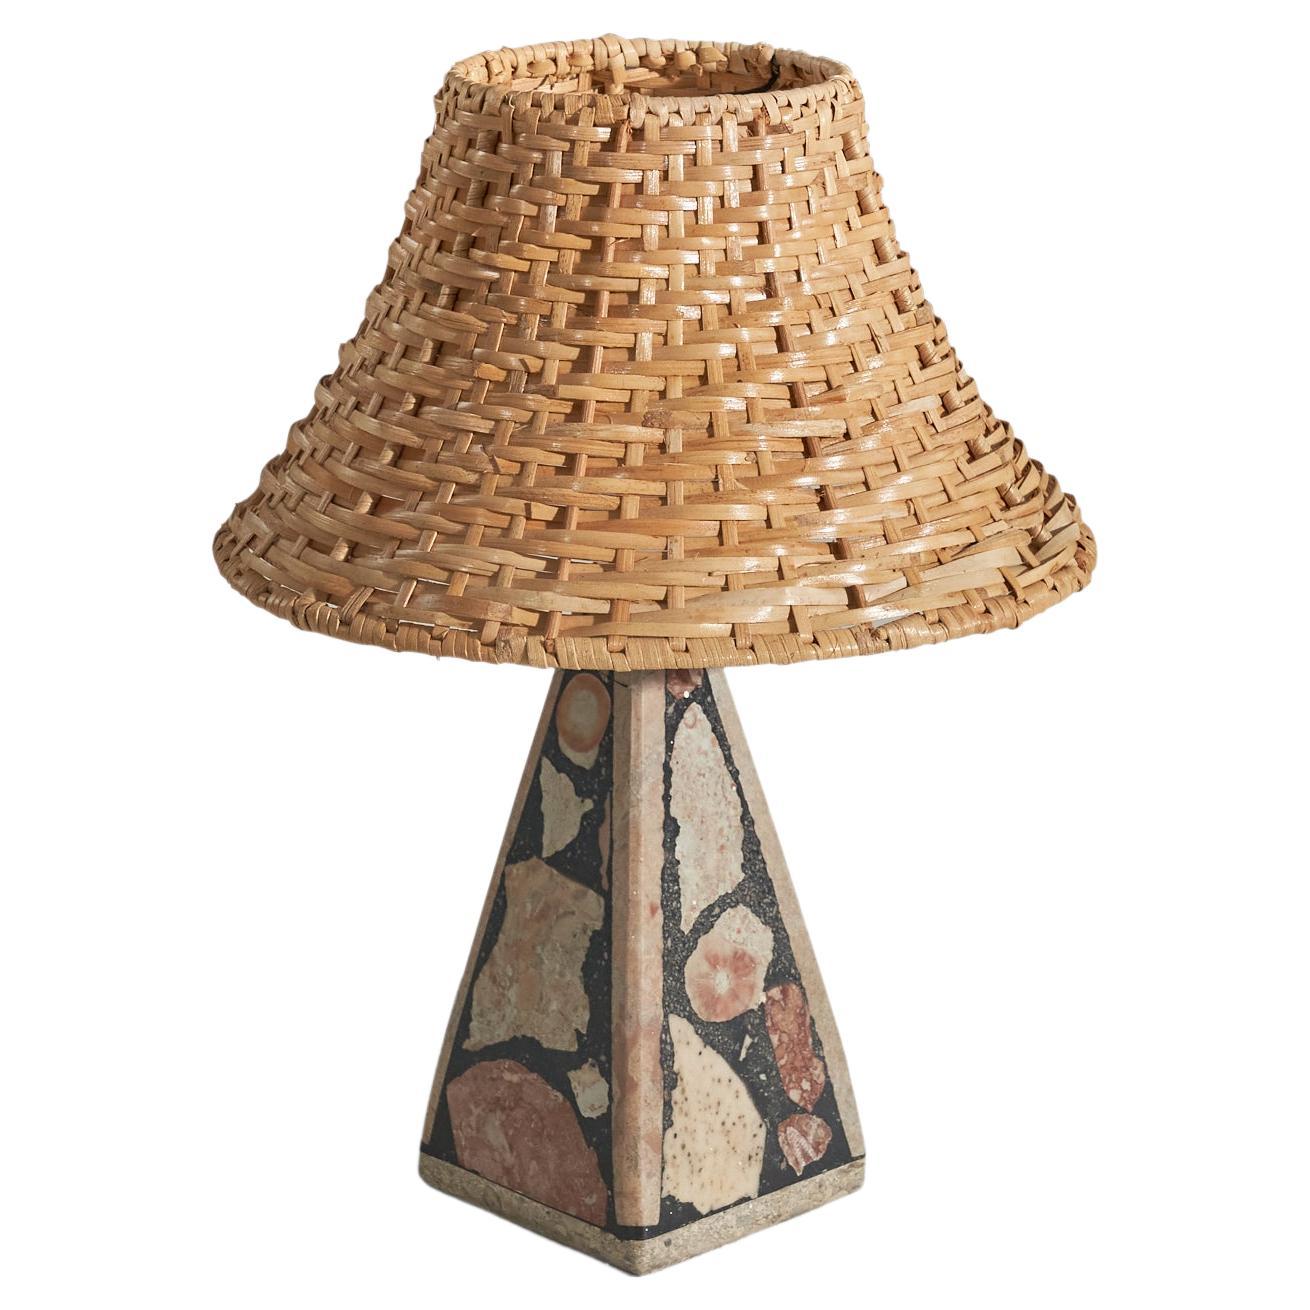 A solid stone table lamp with fossil pieces, Pietra Dura technique, designed and produced in Sweden, c. 1970s.

Sold with rattan lampshade. 
Dimensions of lamp (inches) : 8.75 x 3.48 x 3.36 (Height x Width x Depth)
Dimensions of shade (inches) :